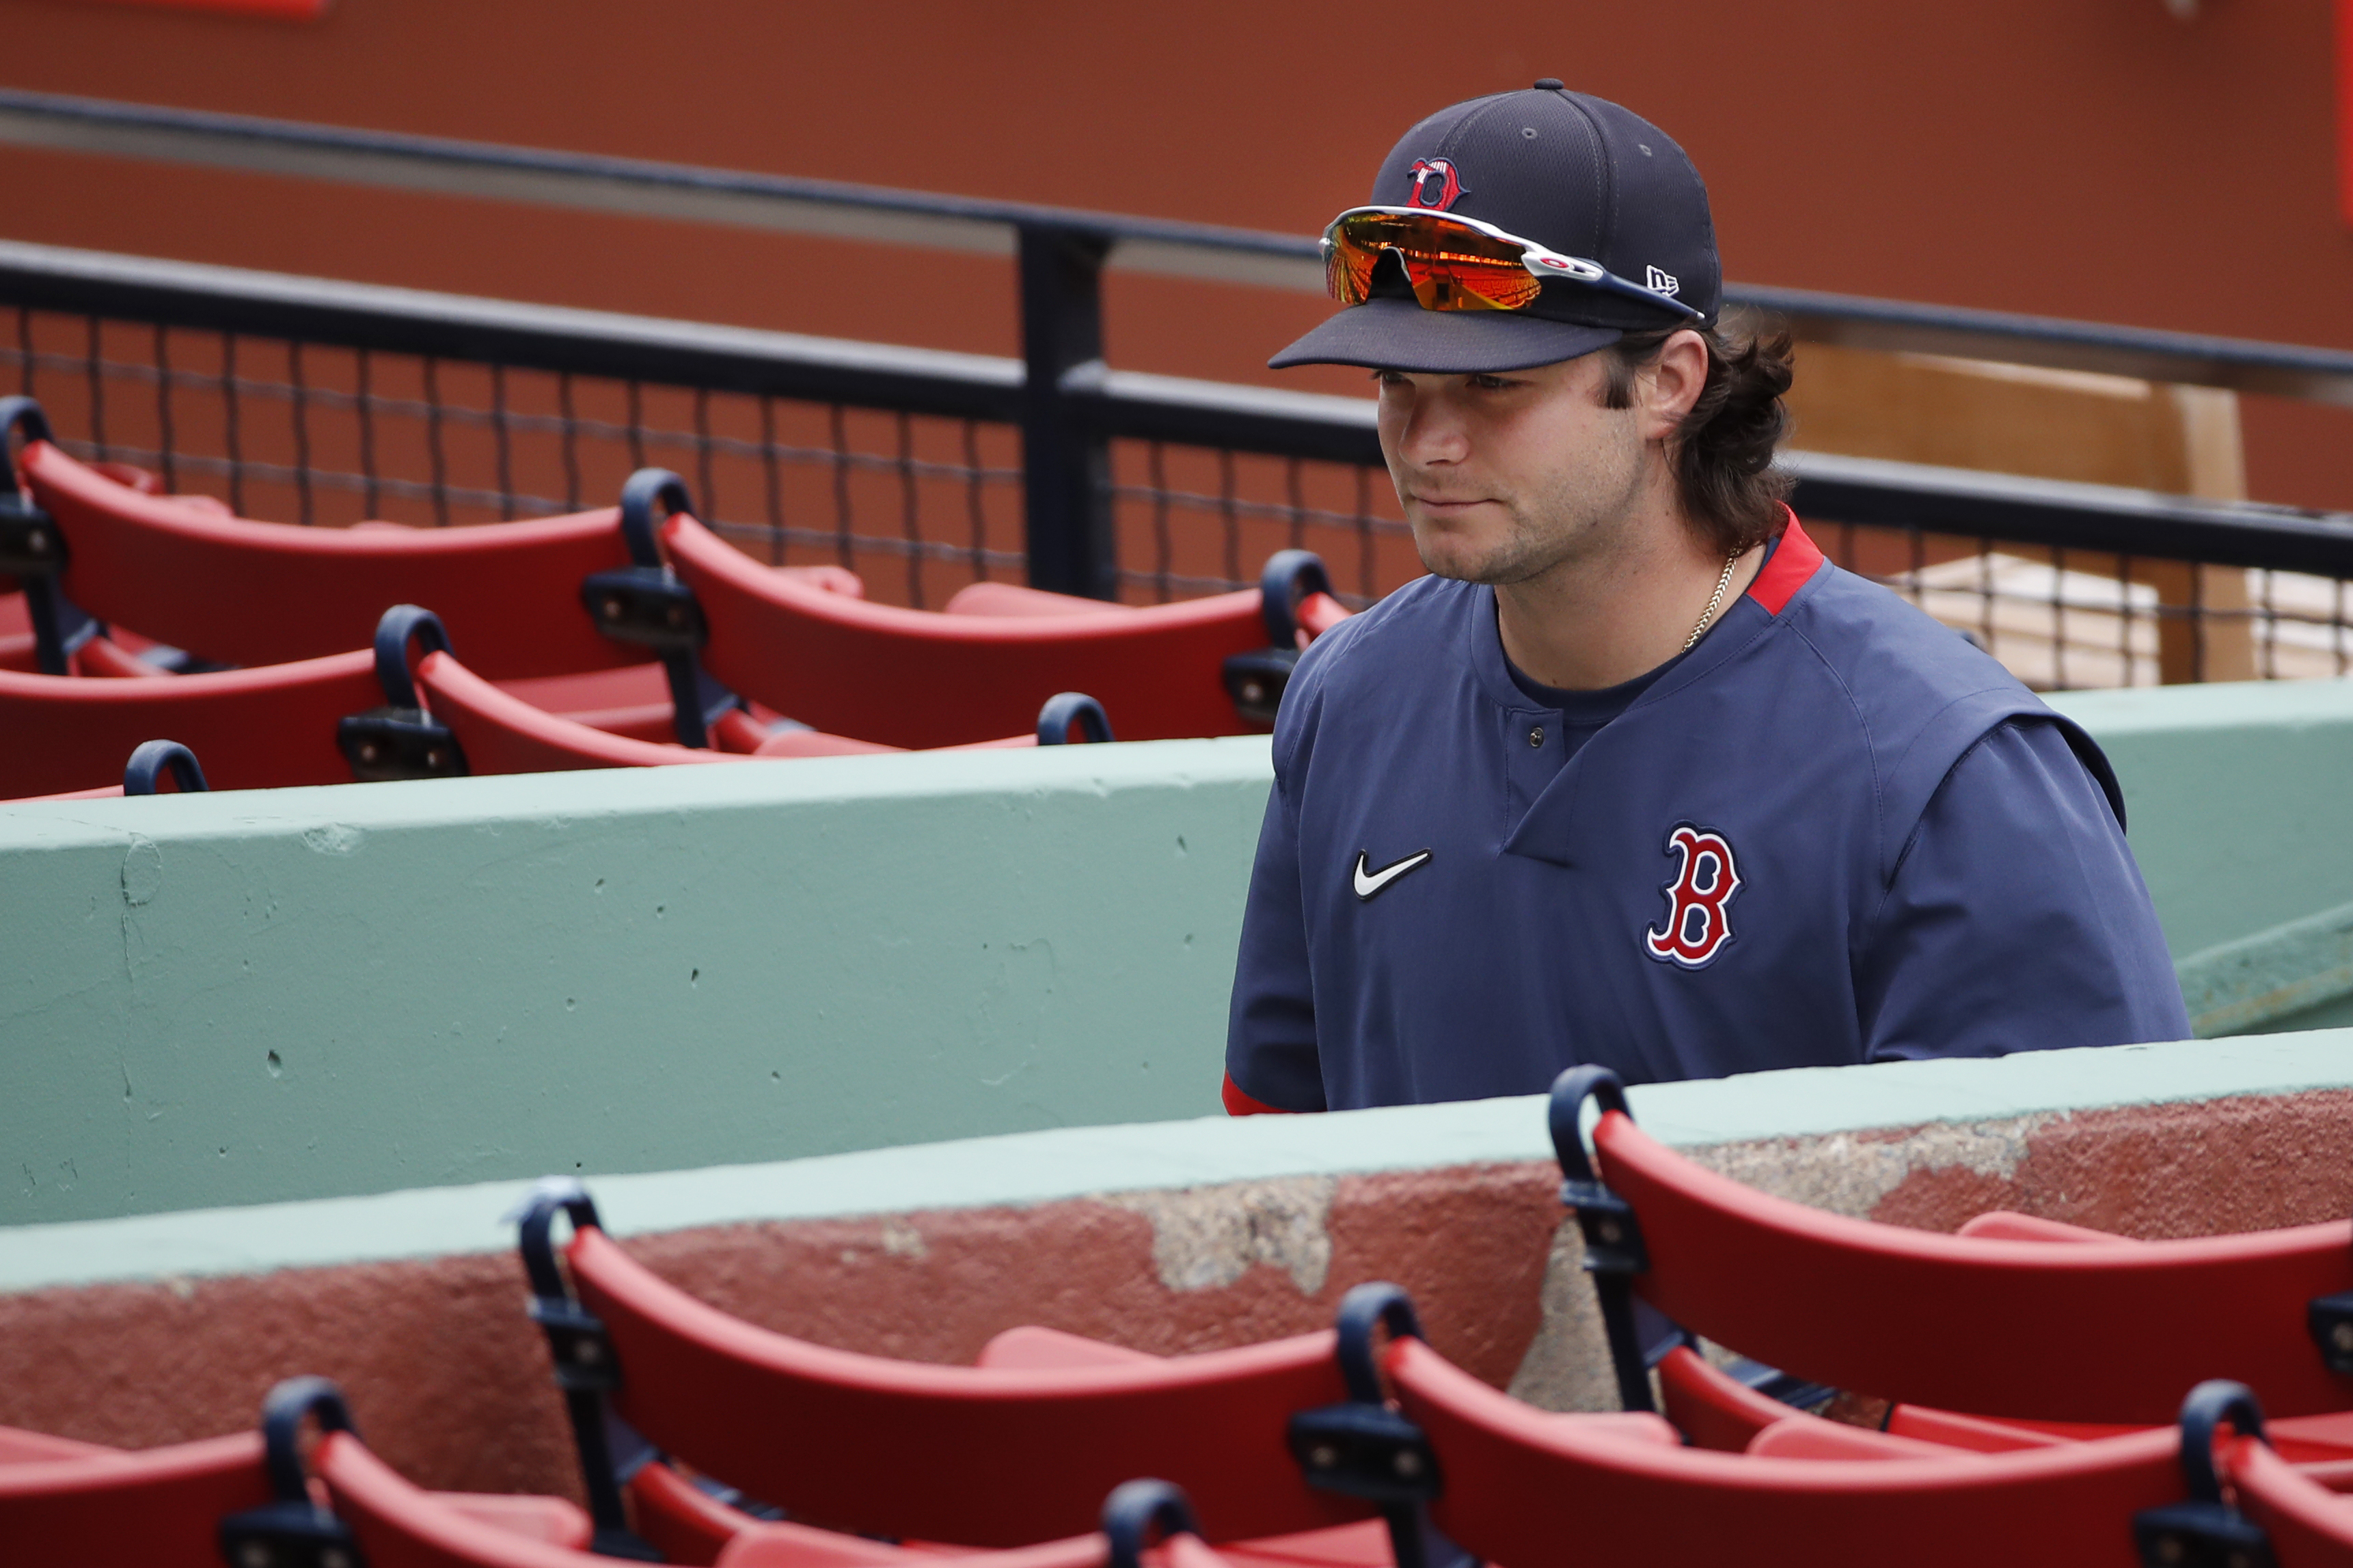 Boston Red Sox 2020 Season Preview: Can Andrew Benintendi hit for power?  Please? - Over the Monster